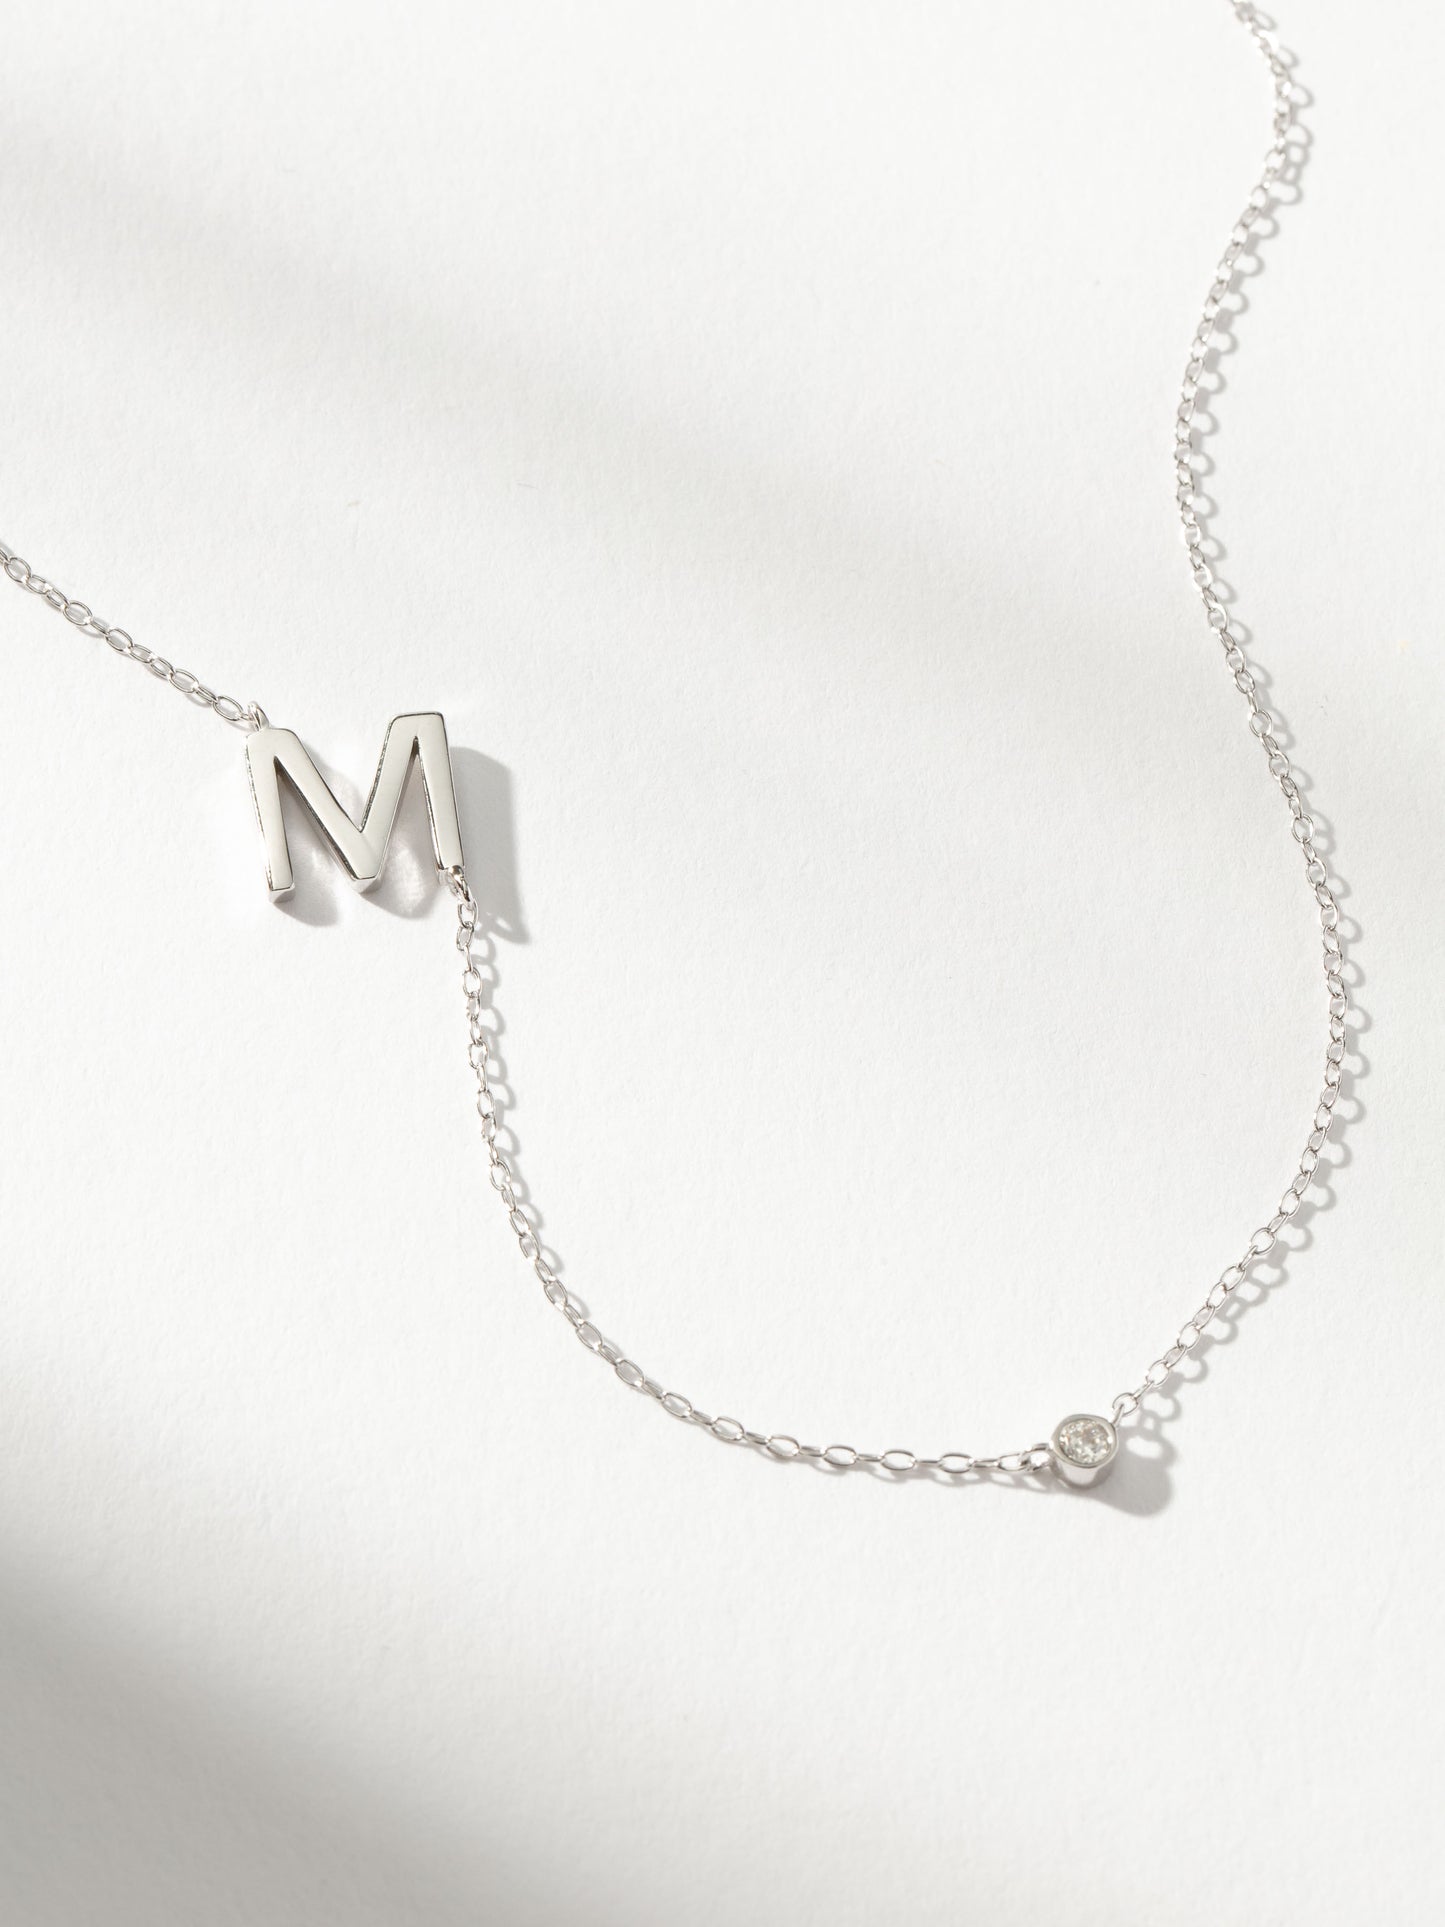 Personalized Touch Necklace | Sterling Silver M | Product Image | Uncommon James